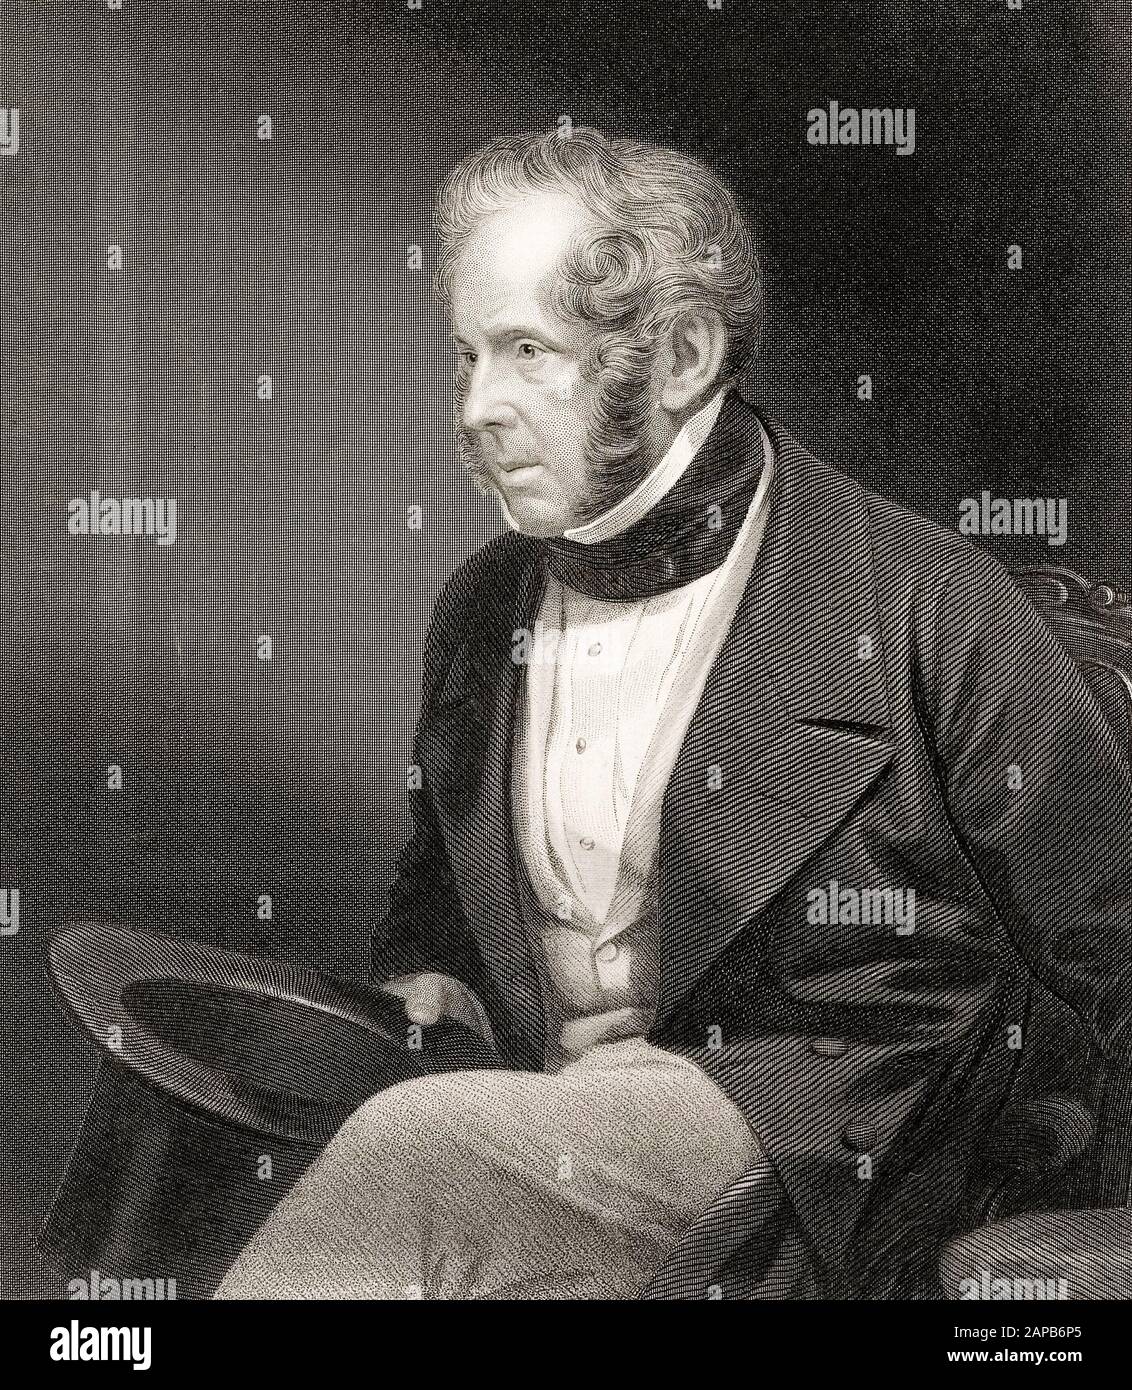 Henry John Temple, Lord Palmerston, 3rd Viscount Palmerston (1784-1865), twice British Prime Minister, portrait engraving by William Holl (after Mayall), 1862-1871 Stock Photo